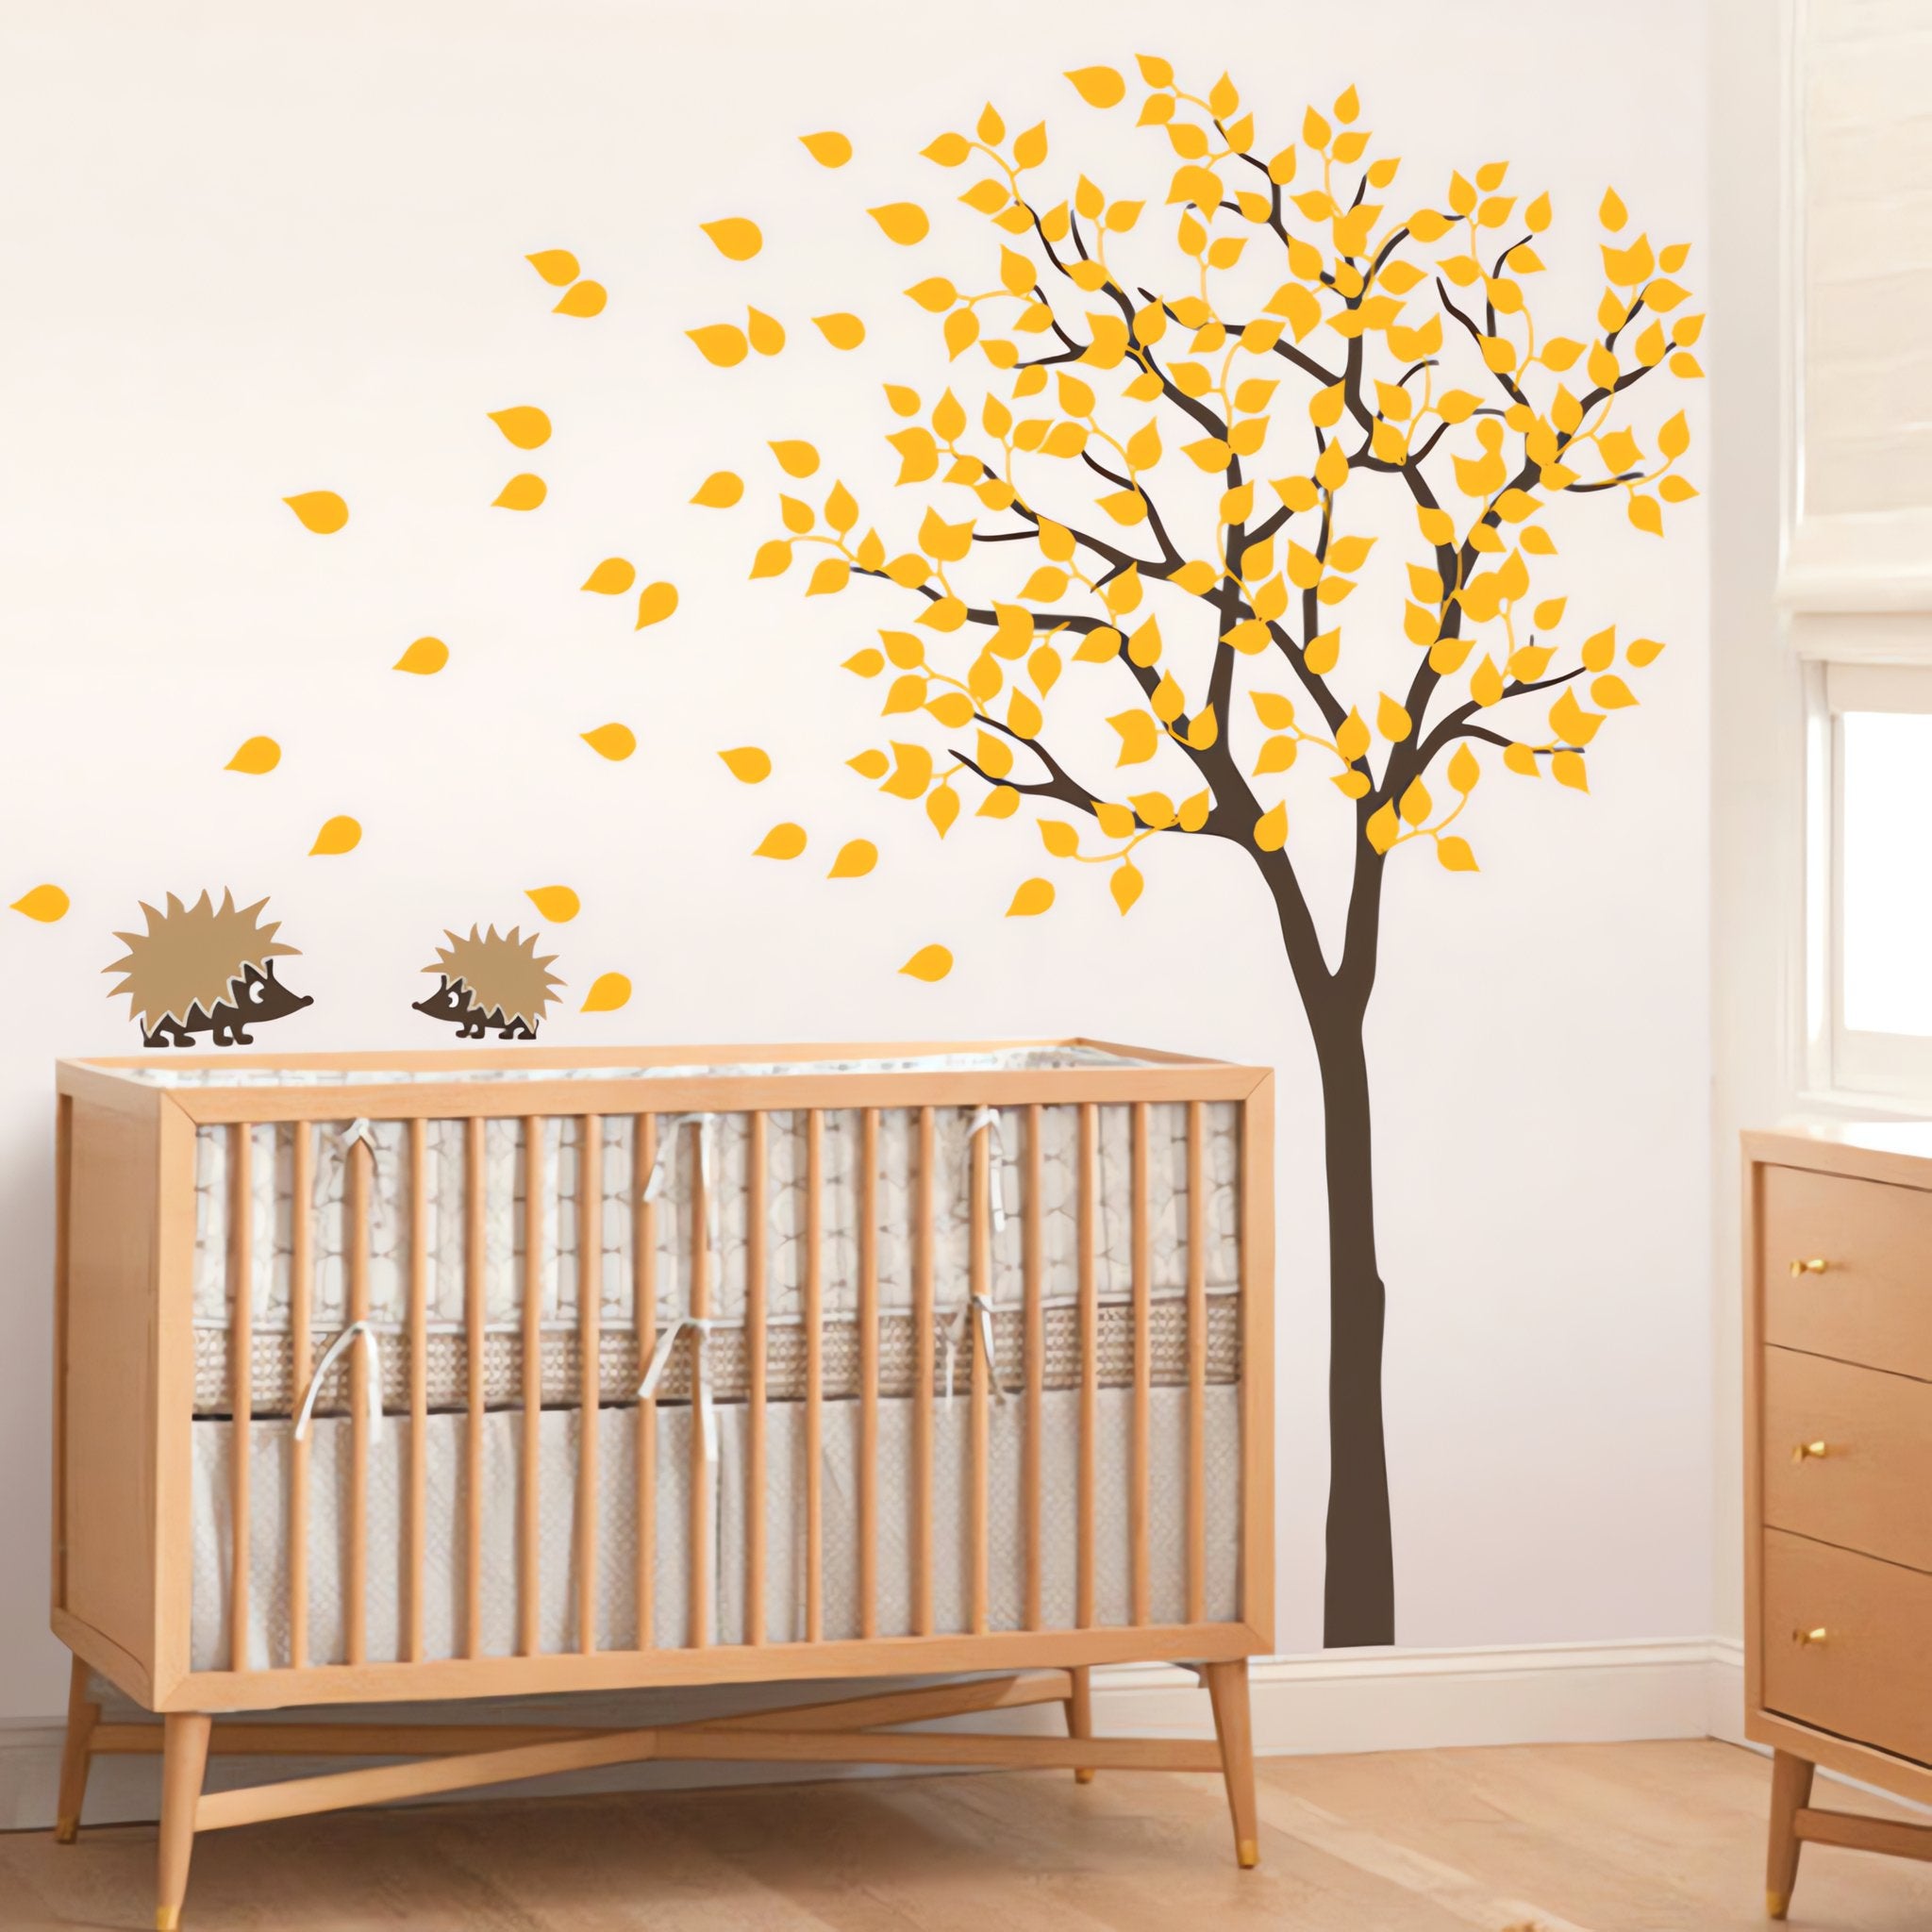 Tree wall sticker with leaves blowing and hedgehogs playing in a nursery with a crib.